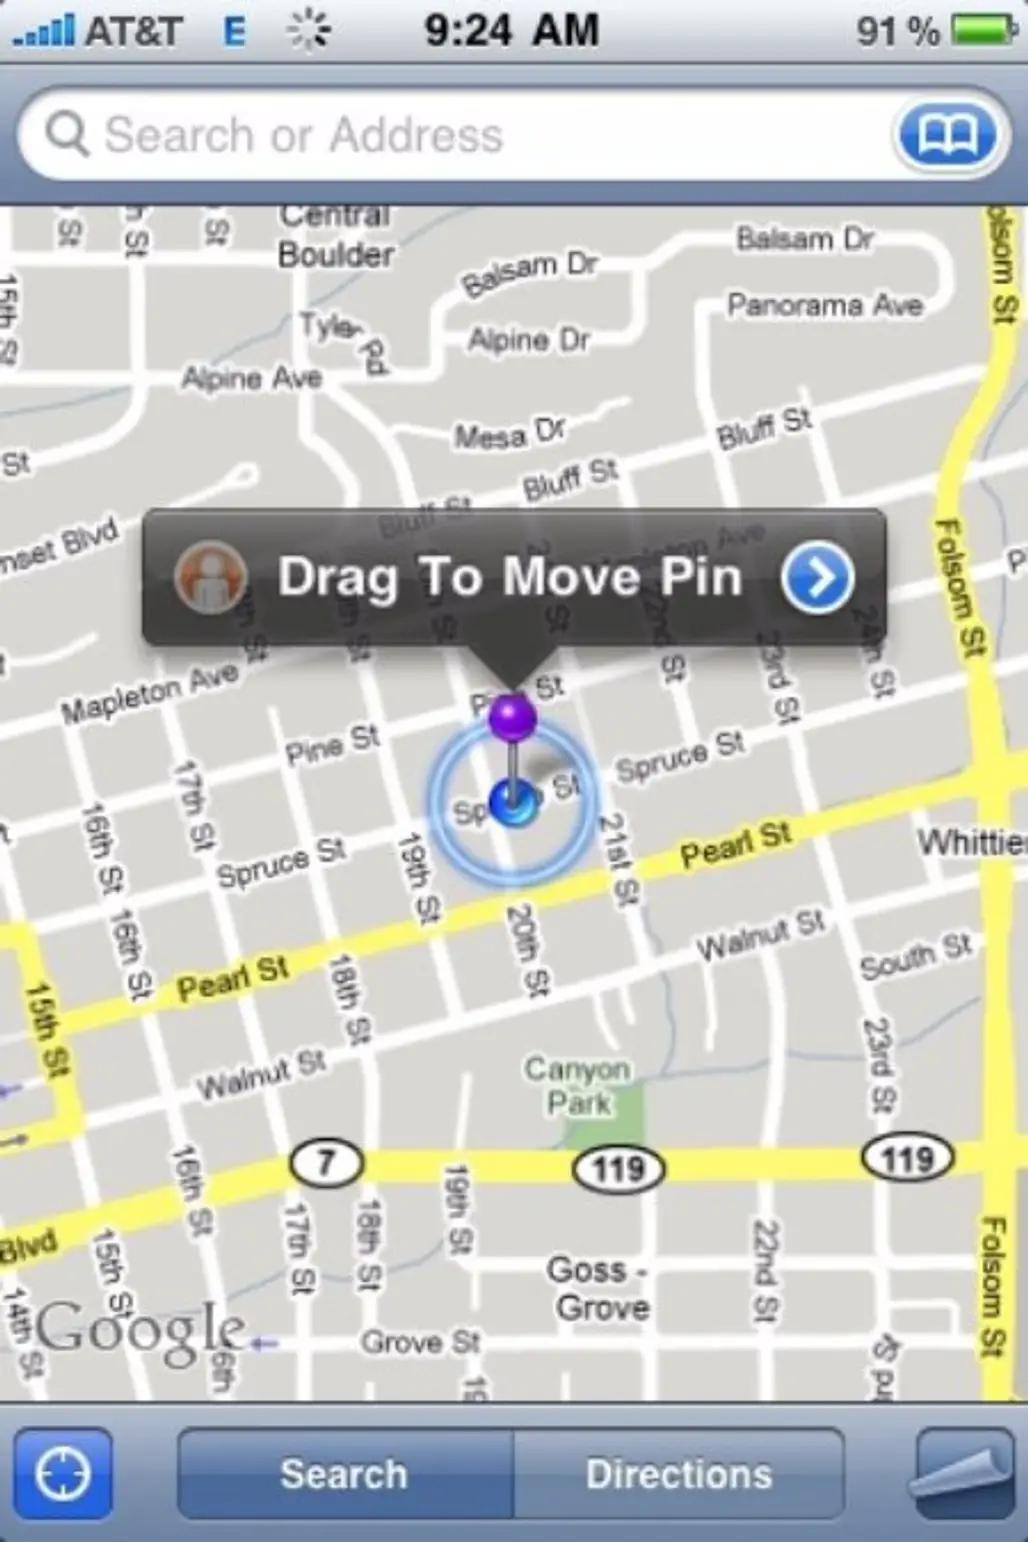 Drop a Pin on Your Map App when You Leave the Car so You Can Find It Easily